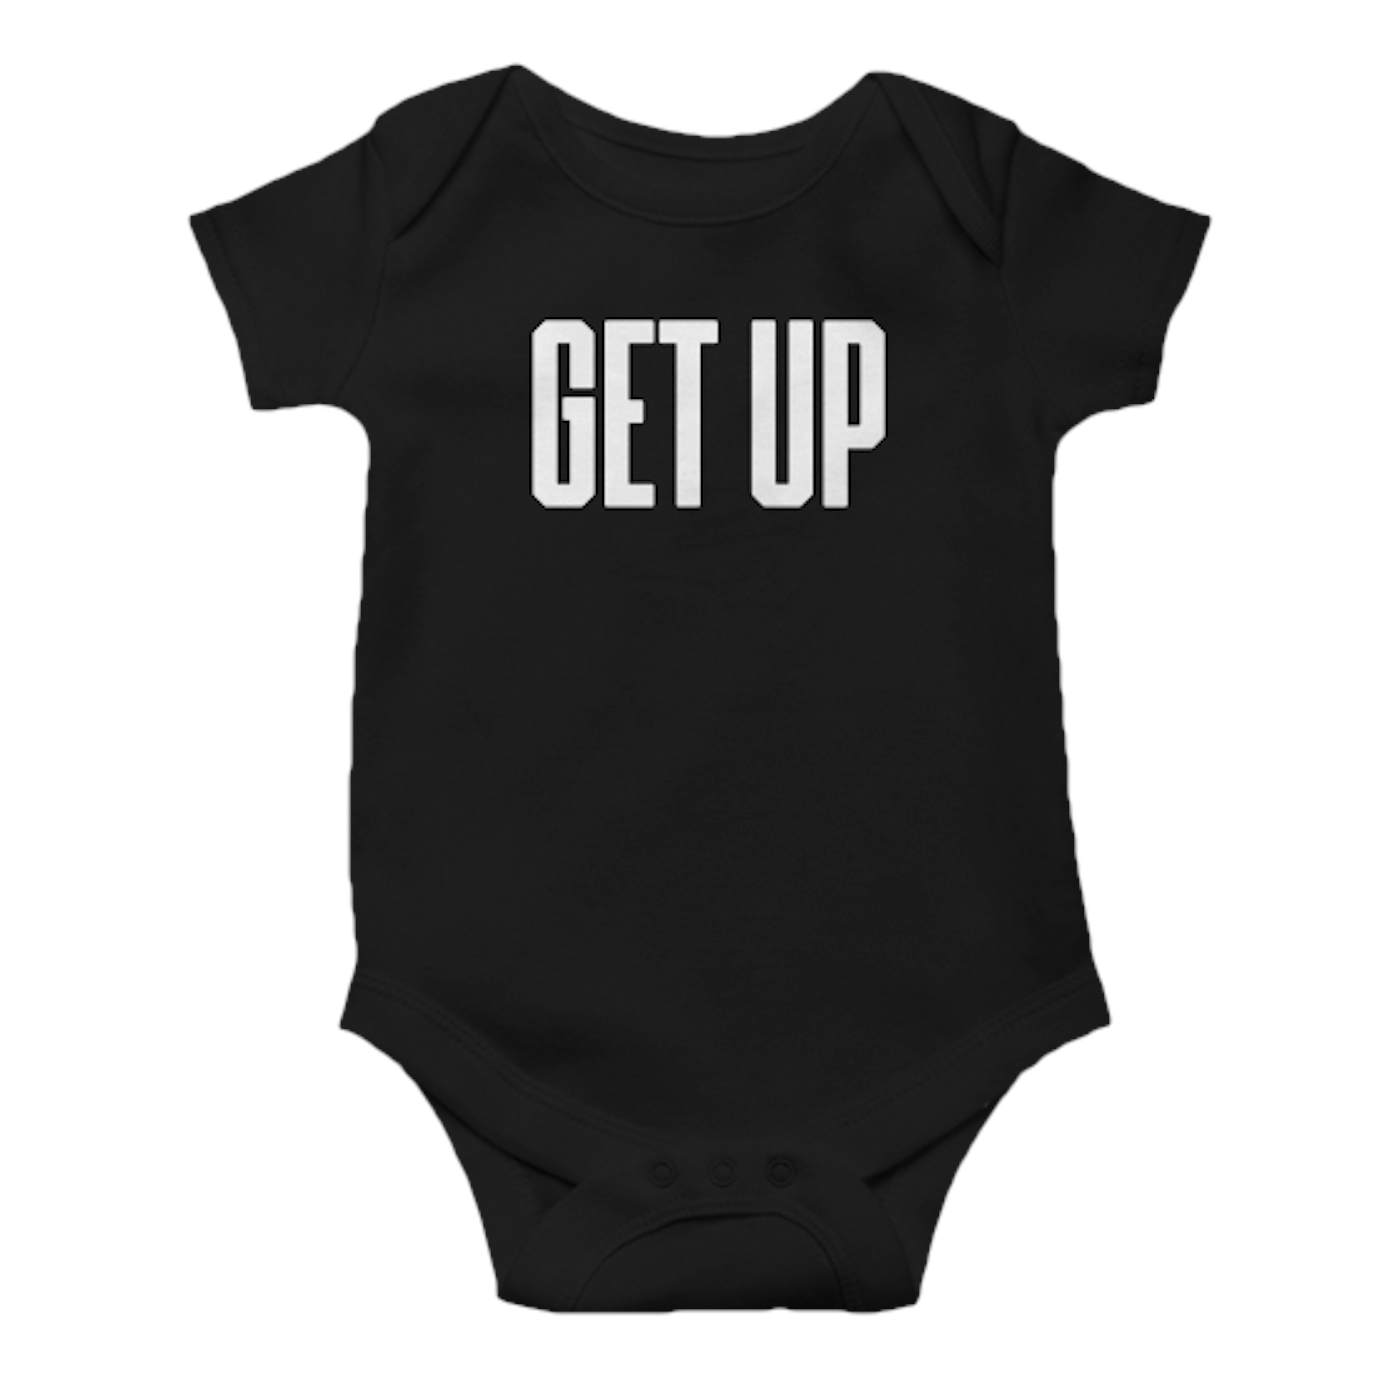 T-Pain GET UP - THE ONLY THING THAT MATTERS - BABY ONESIE - Baby Onesie